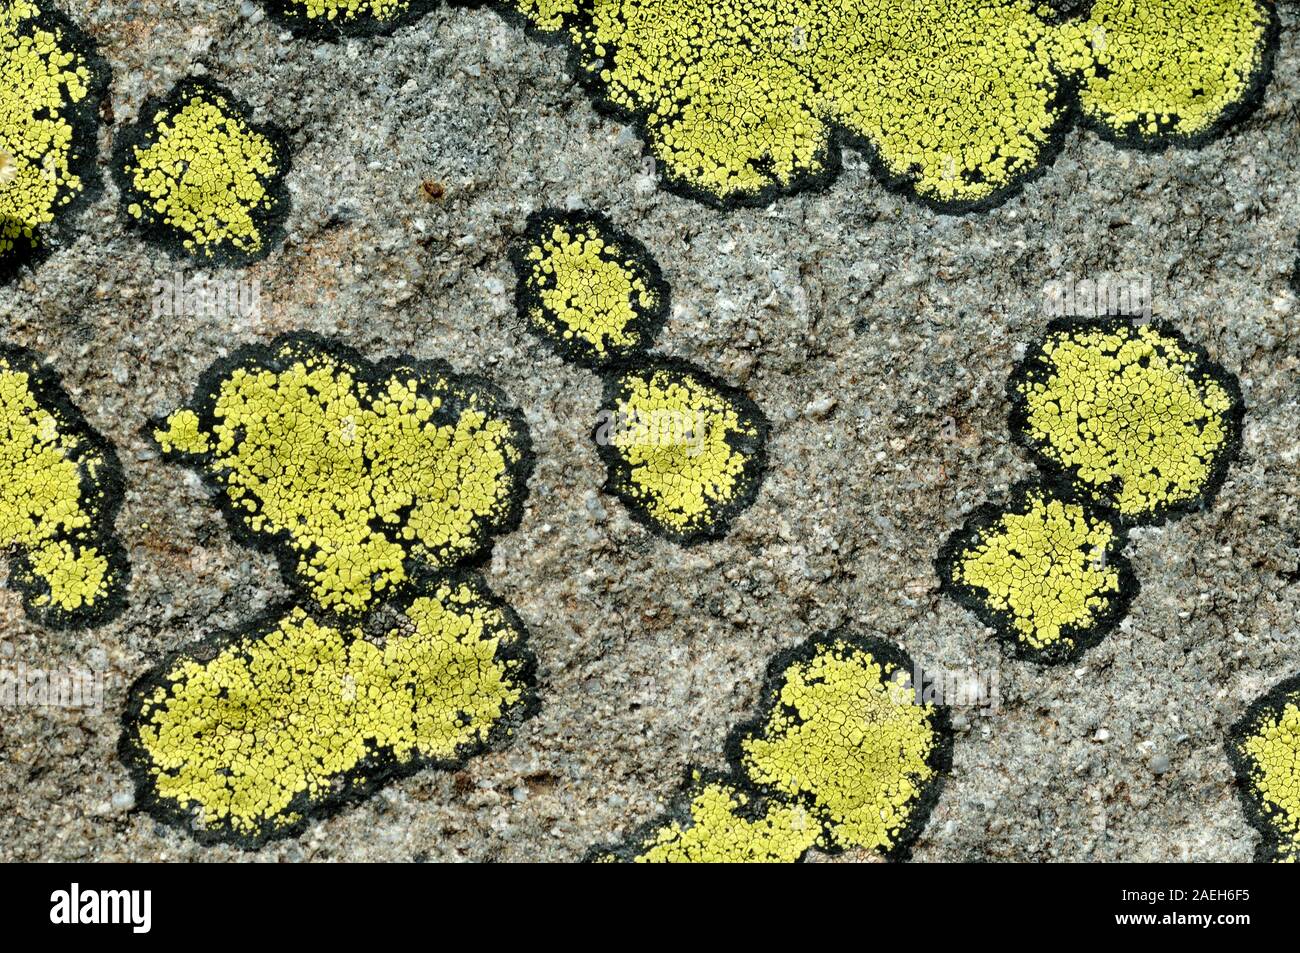 Abstract Pattern of Lichen Thalli Forms of Map Lichen Rhizocarpon geographicum, a Species of Lichen Growing in Mountainous Areas Stock Photo